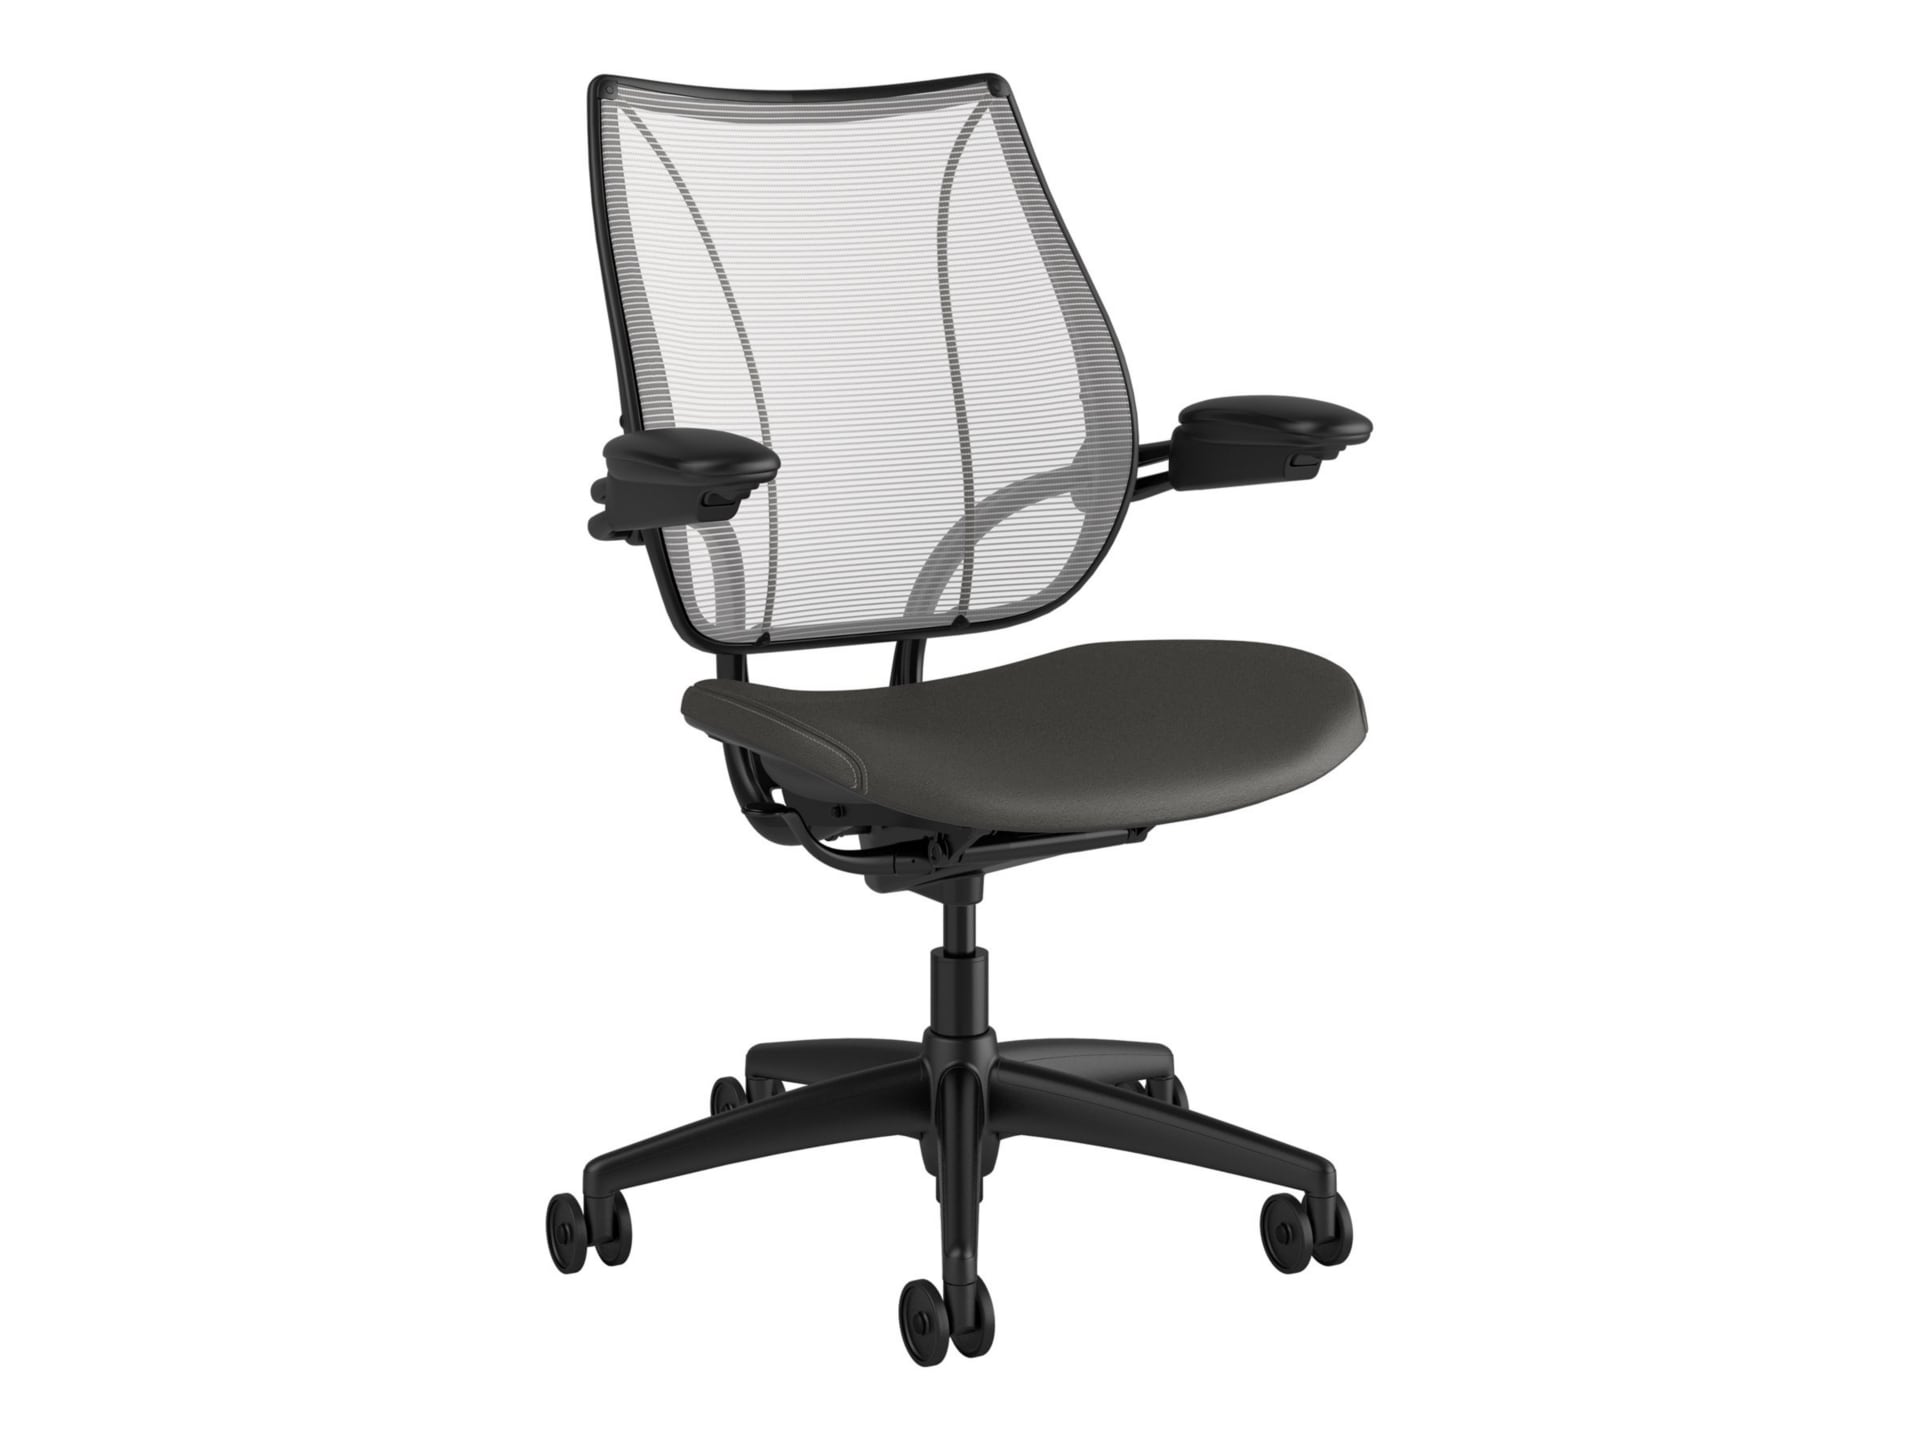 Humanscale Liberty - chair - ticino (chrome-free leather) - white (back), charcoal/light gray